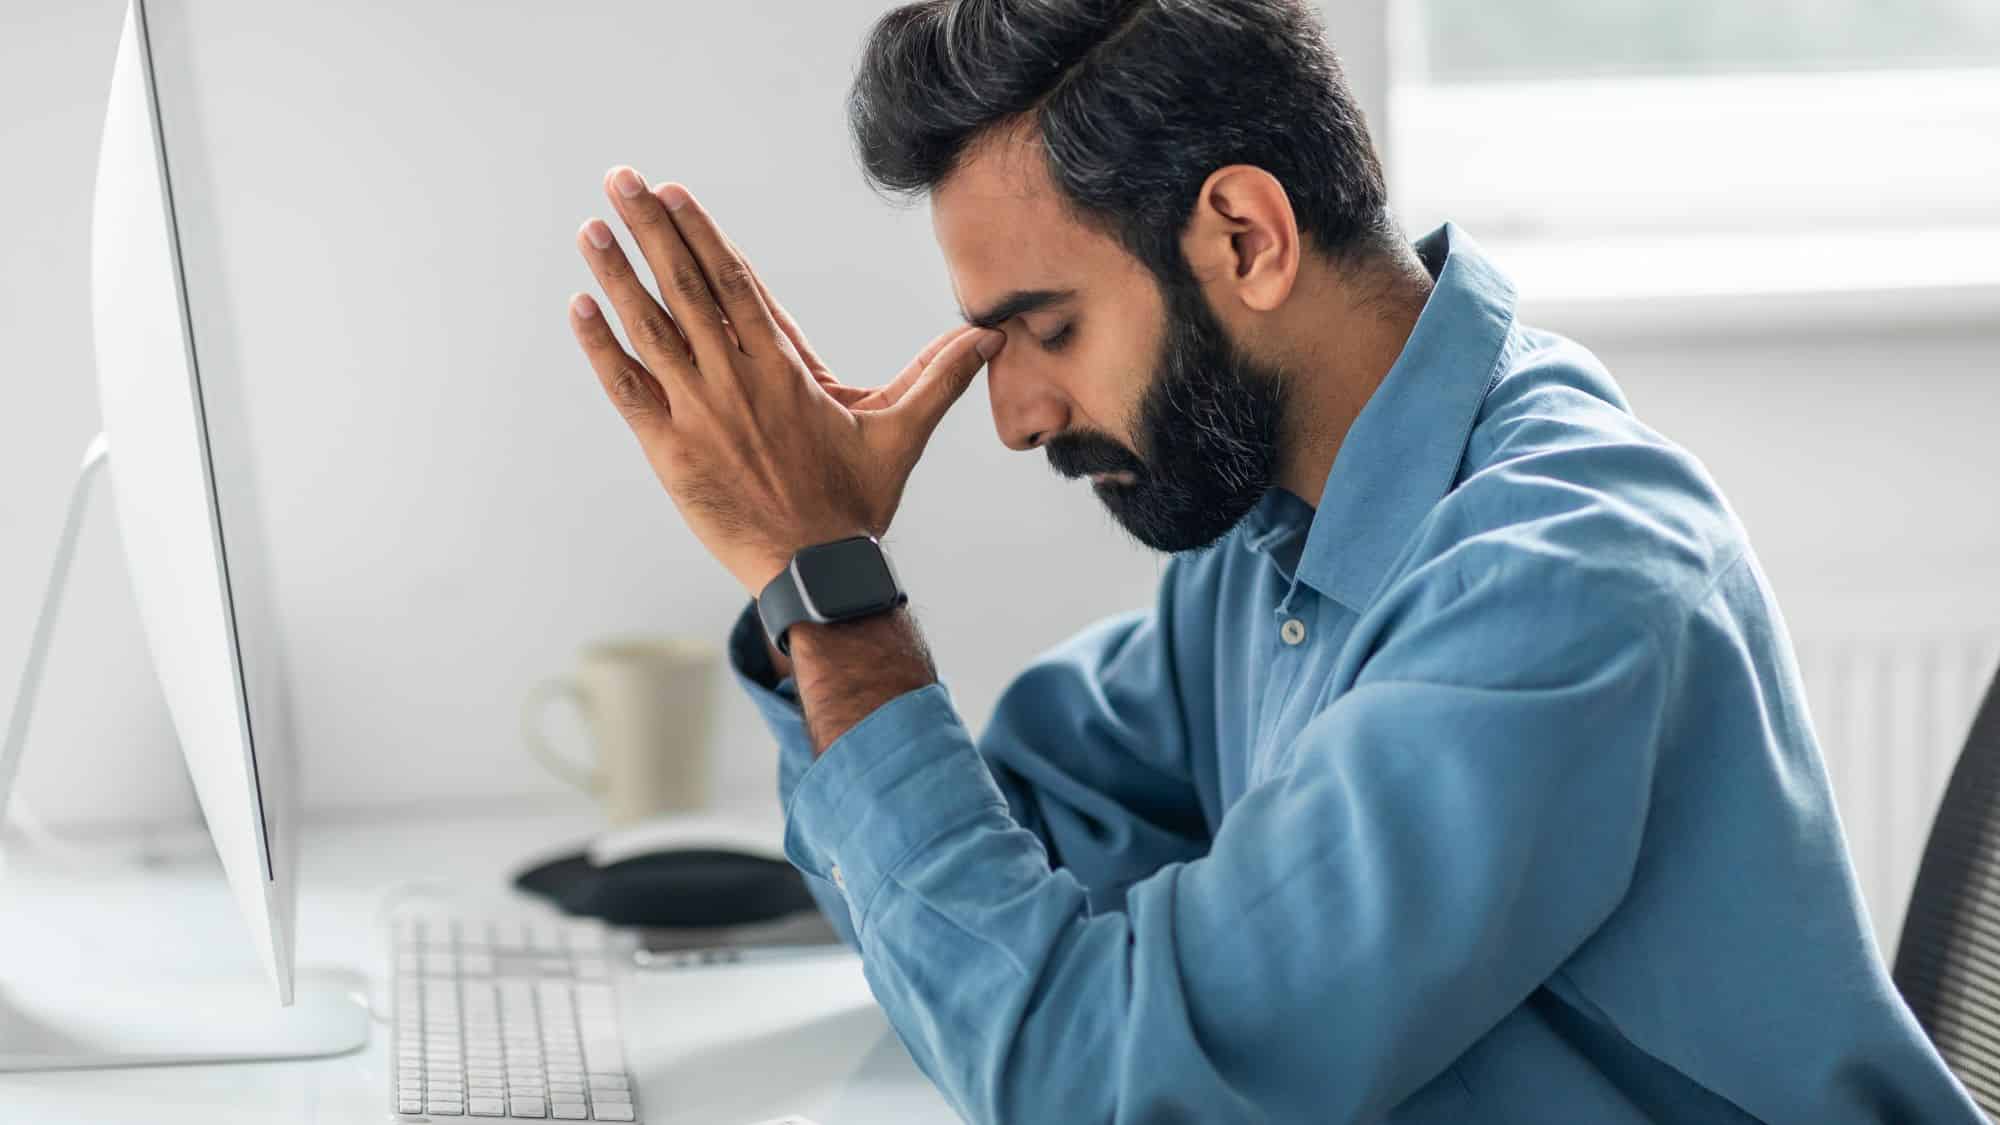 Man sitting at desk holding his head